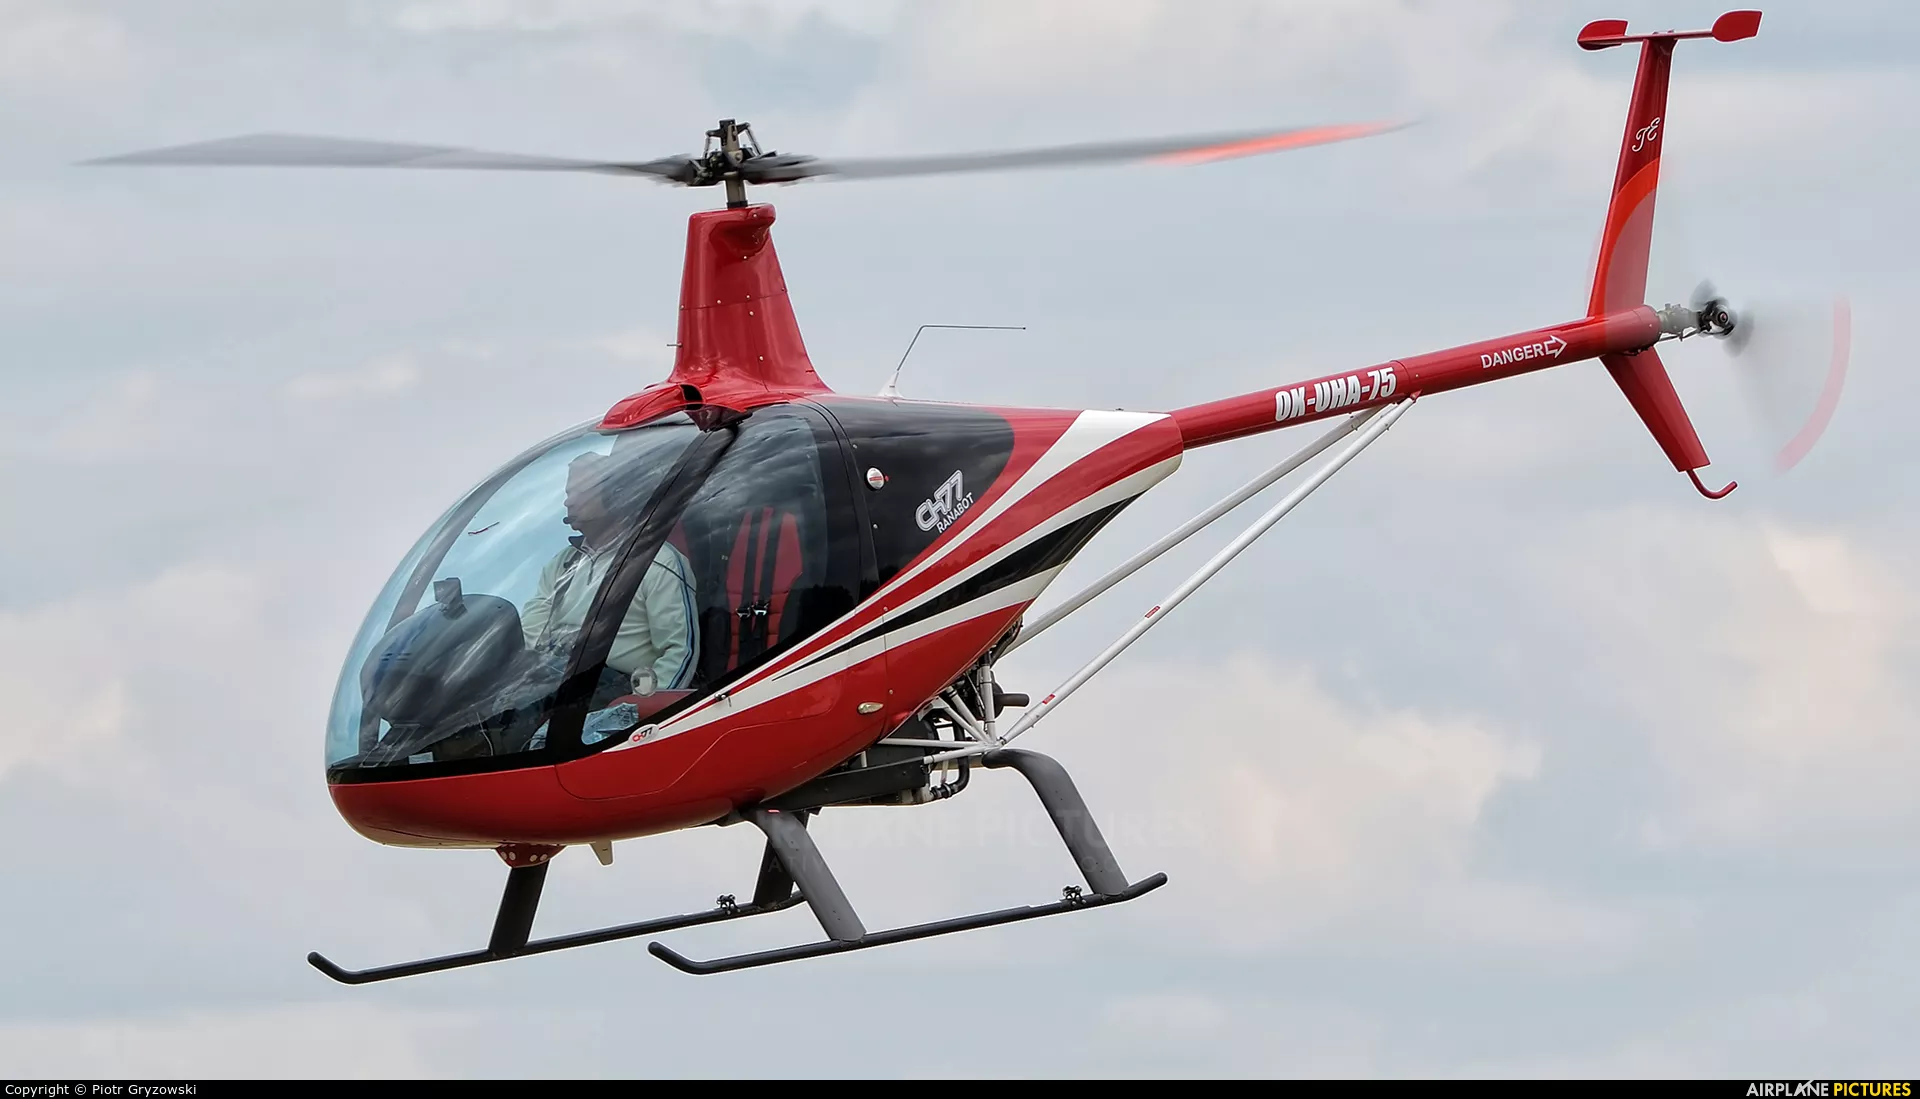 Rainbow Air Inc in USA, North America | Helicopter Sport - Rated 4.4